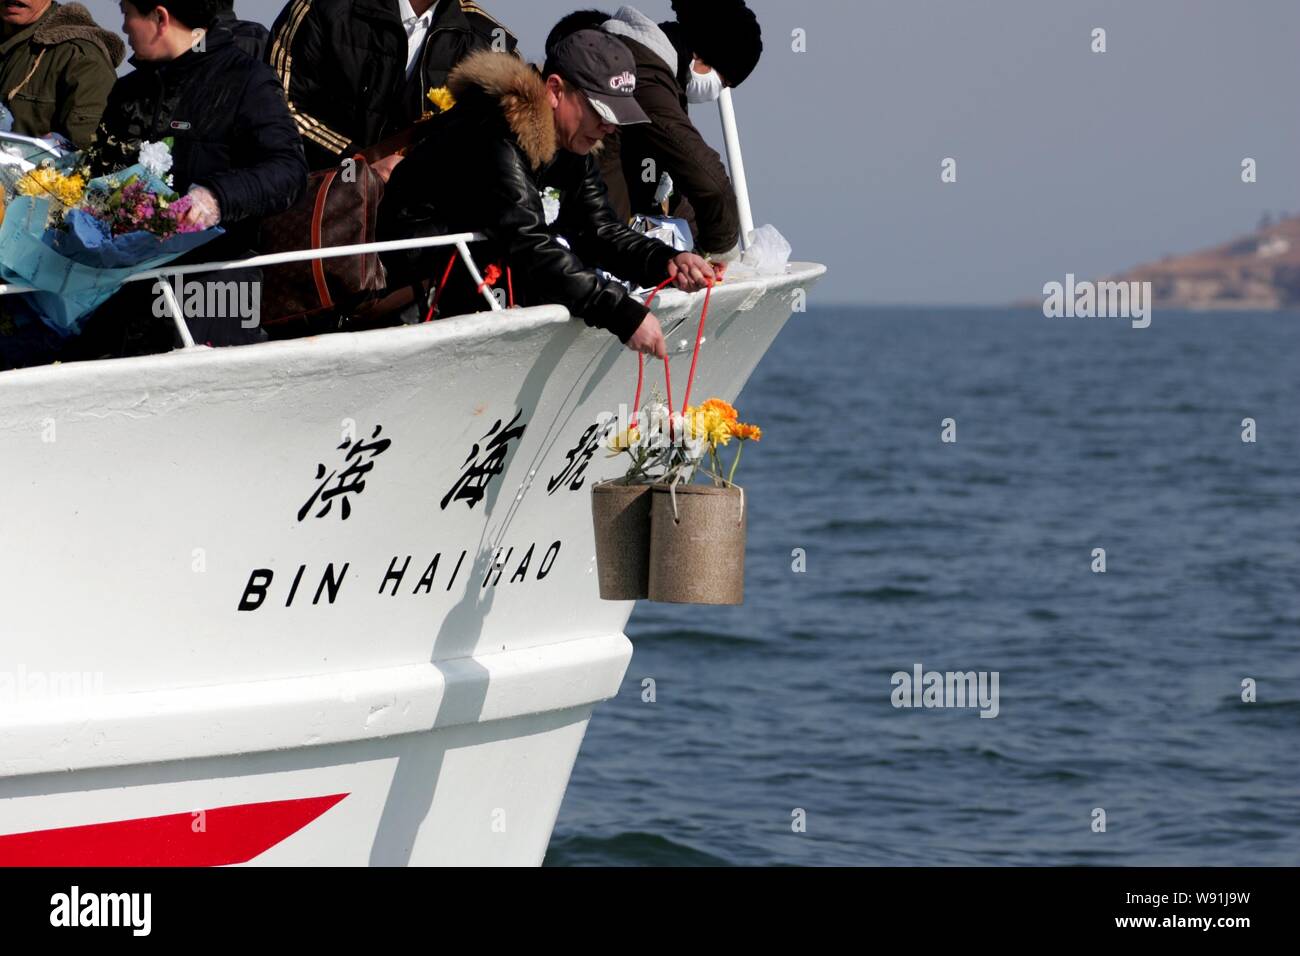 A man lowers the urns with bone ash of a deceased relative before dropping them into the water during a sea burial ceremony on a boat in Dalian city, Stock Photo